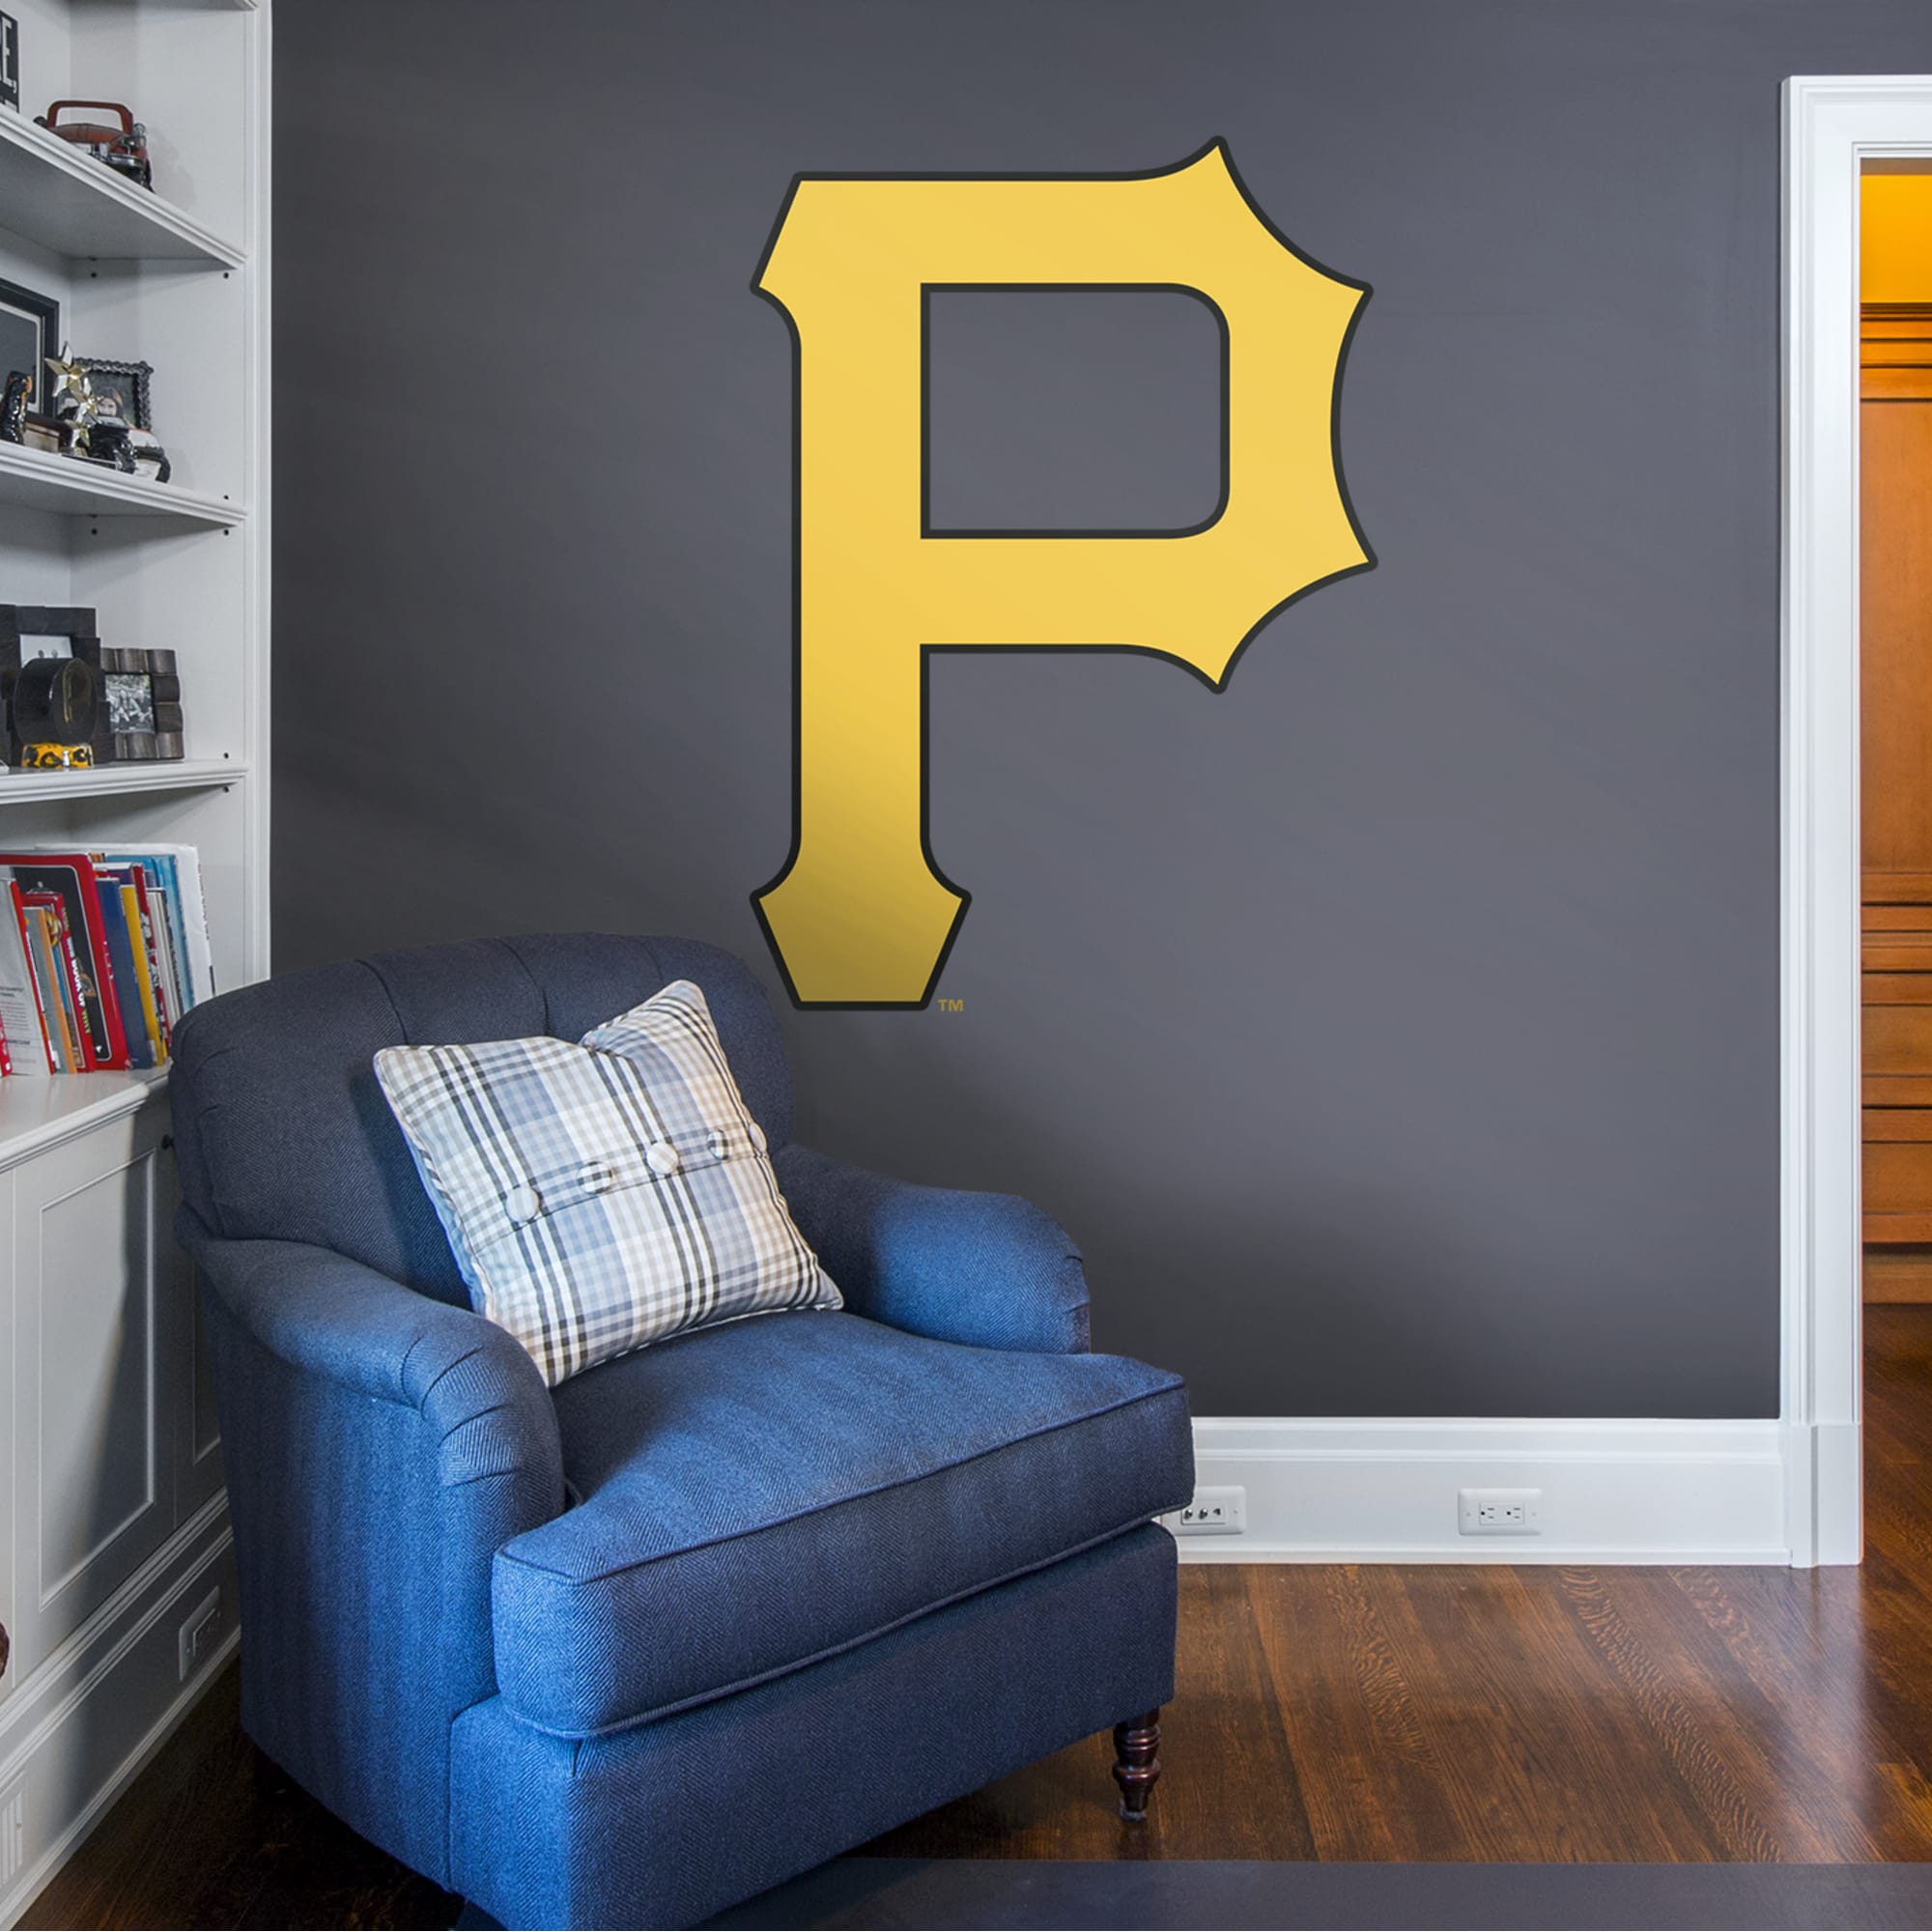 Pittsburgh Pirates: Logo - Officially Licensed MLB Removable Wall Decal Giant Logo (37"W x 51"H) by Fathead | Vinyl